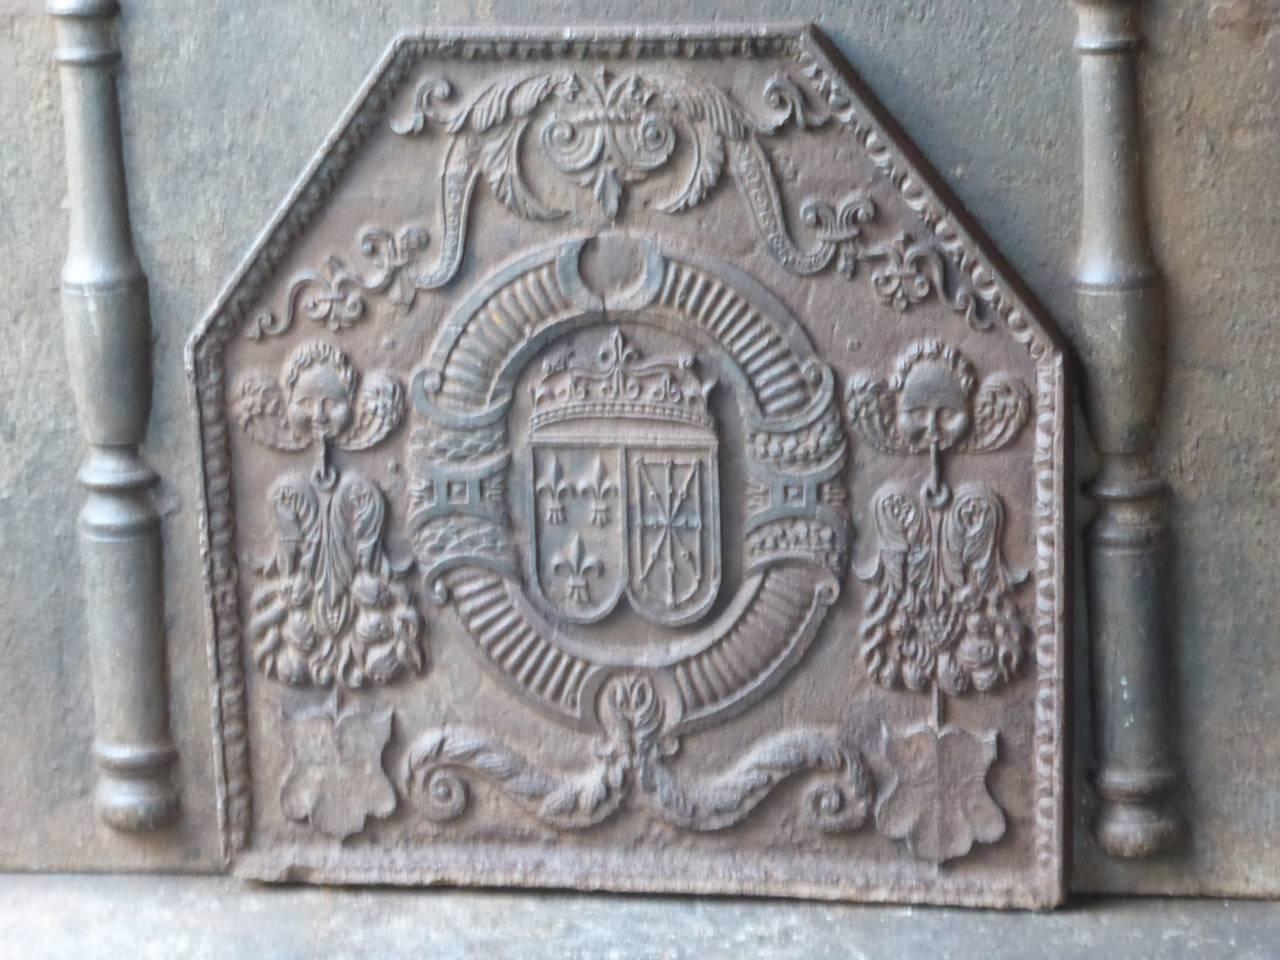 17th century French fireback with the arms of France and Navarre. 

Arms of the House of Bourbon from France, one of the major royal dynasties of Europe that produced monarchs of Spain (Navarre), France, the two Sicilies and Parma. Bourbon kings